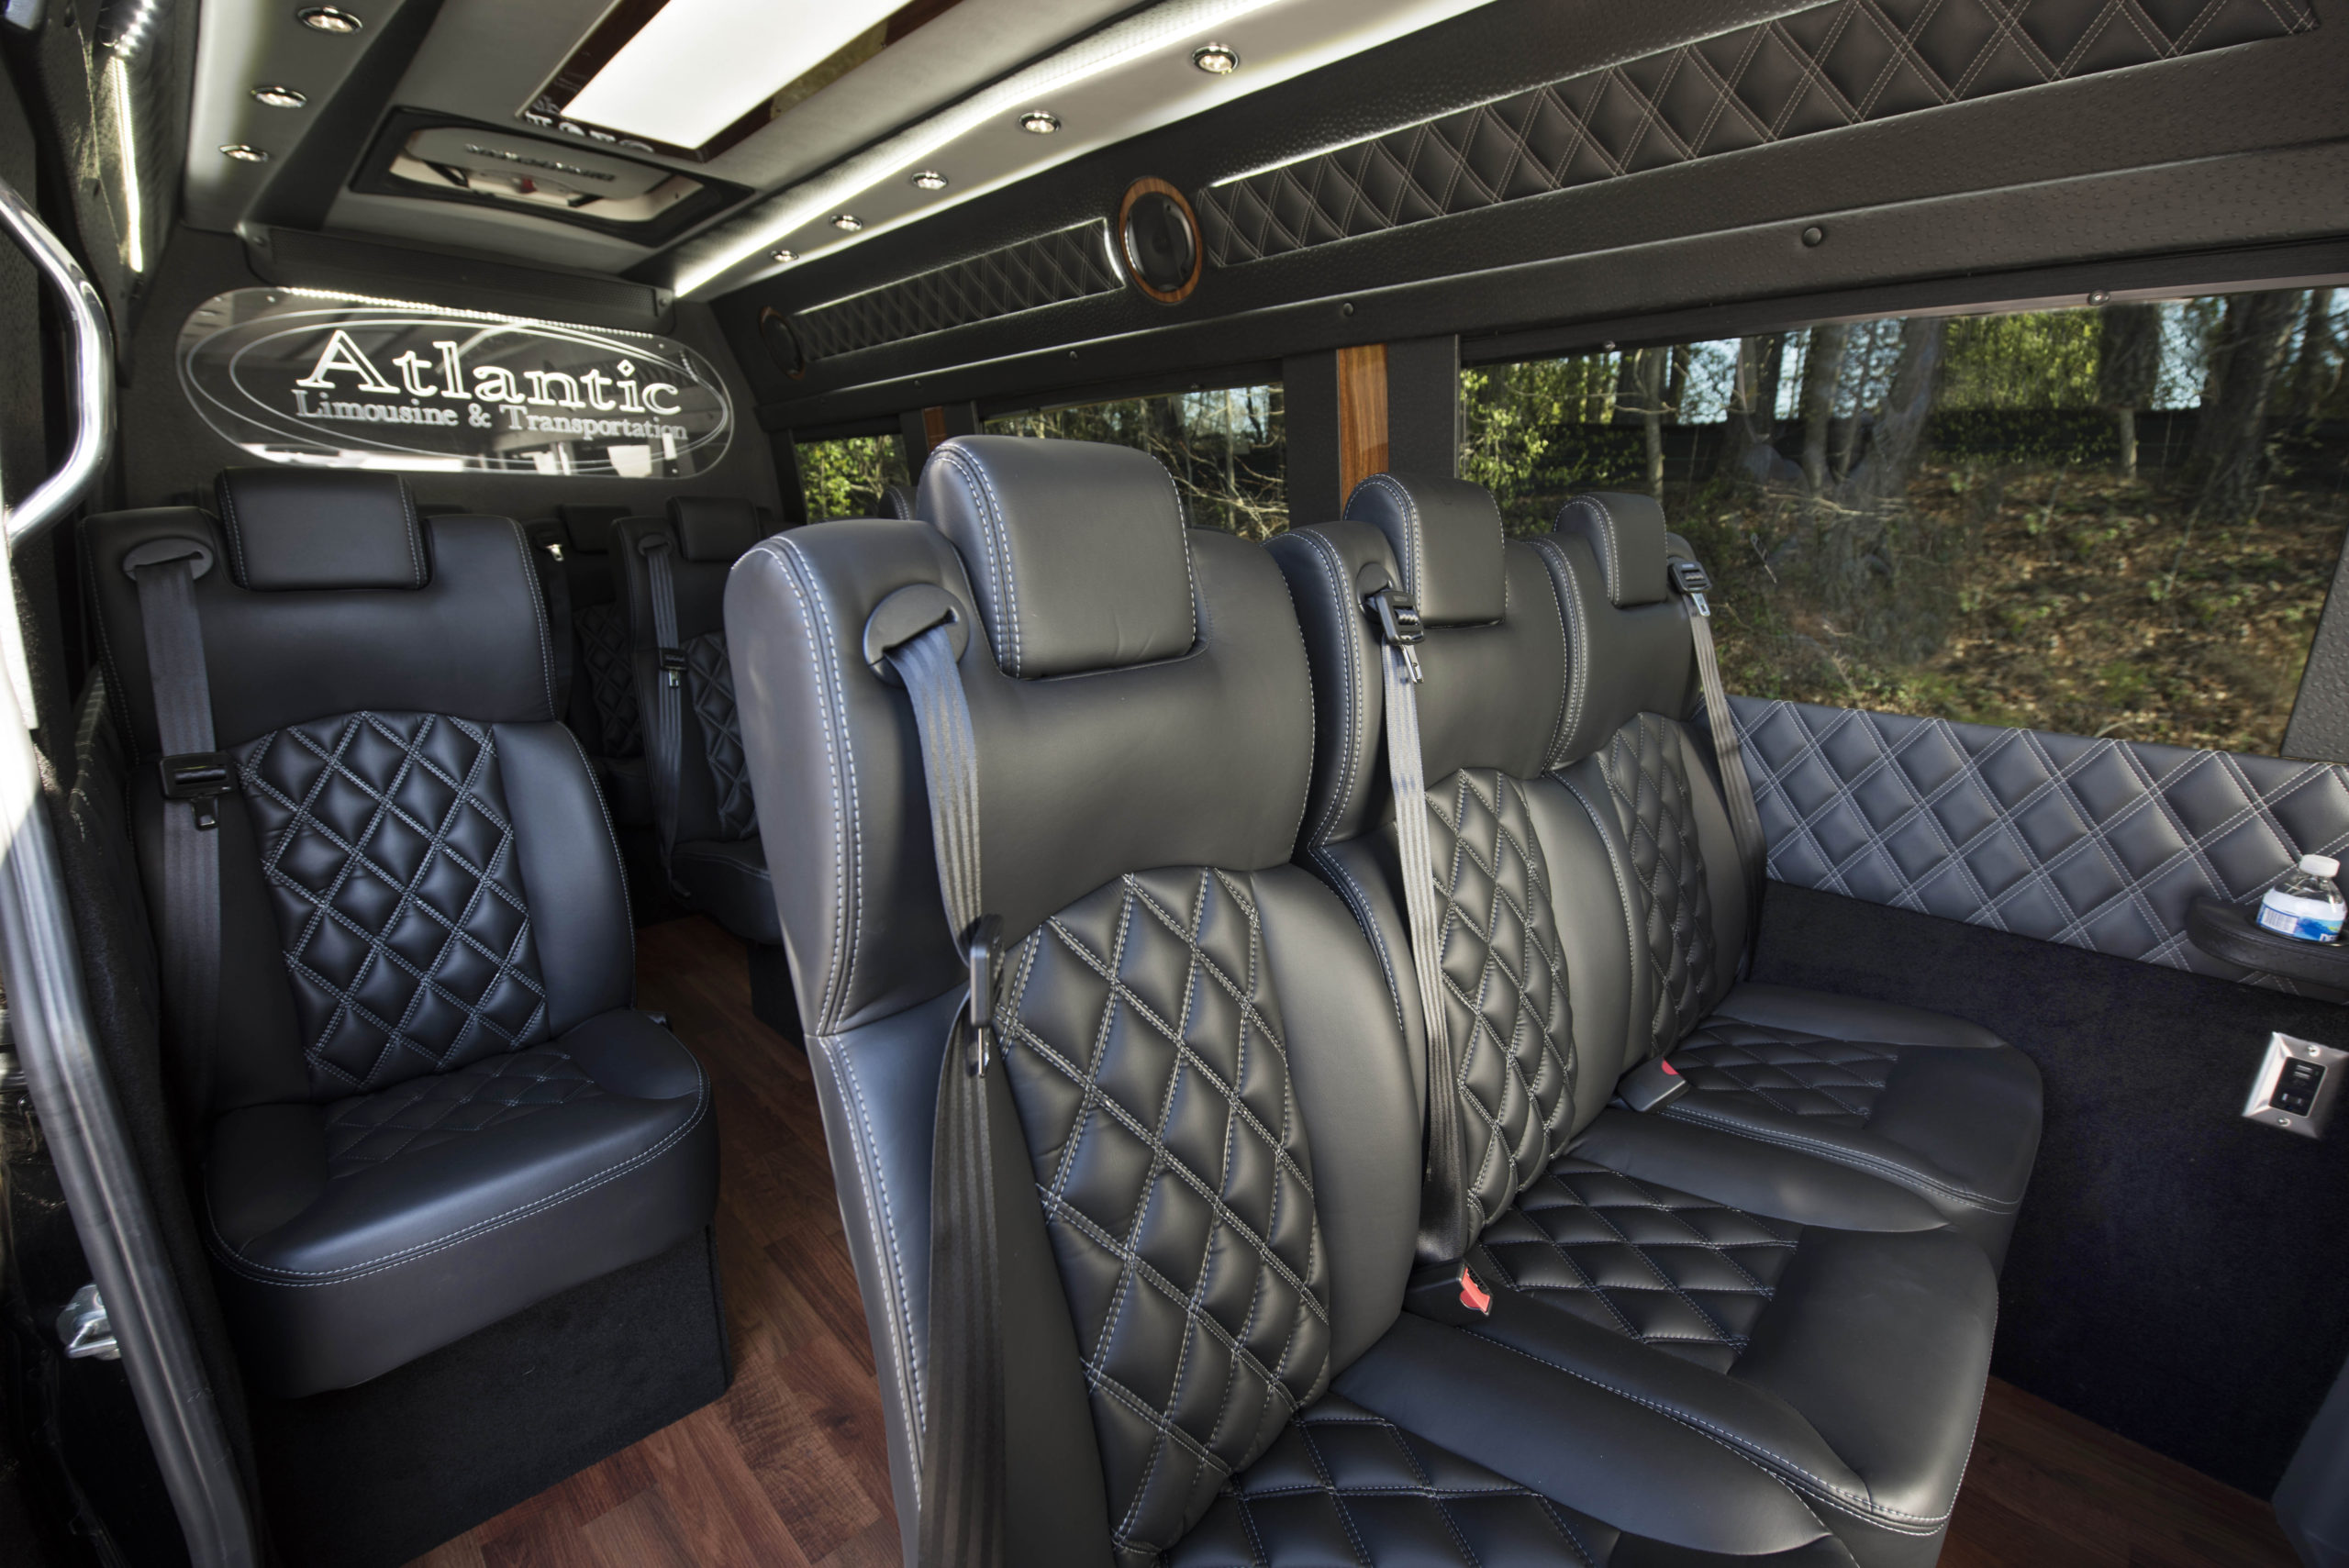 Heck Out Our Luxury Vans At Atlantic Limo Atlantic Limo